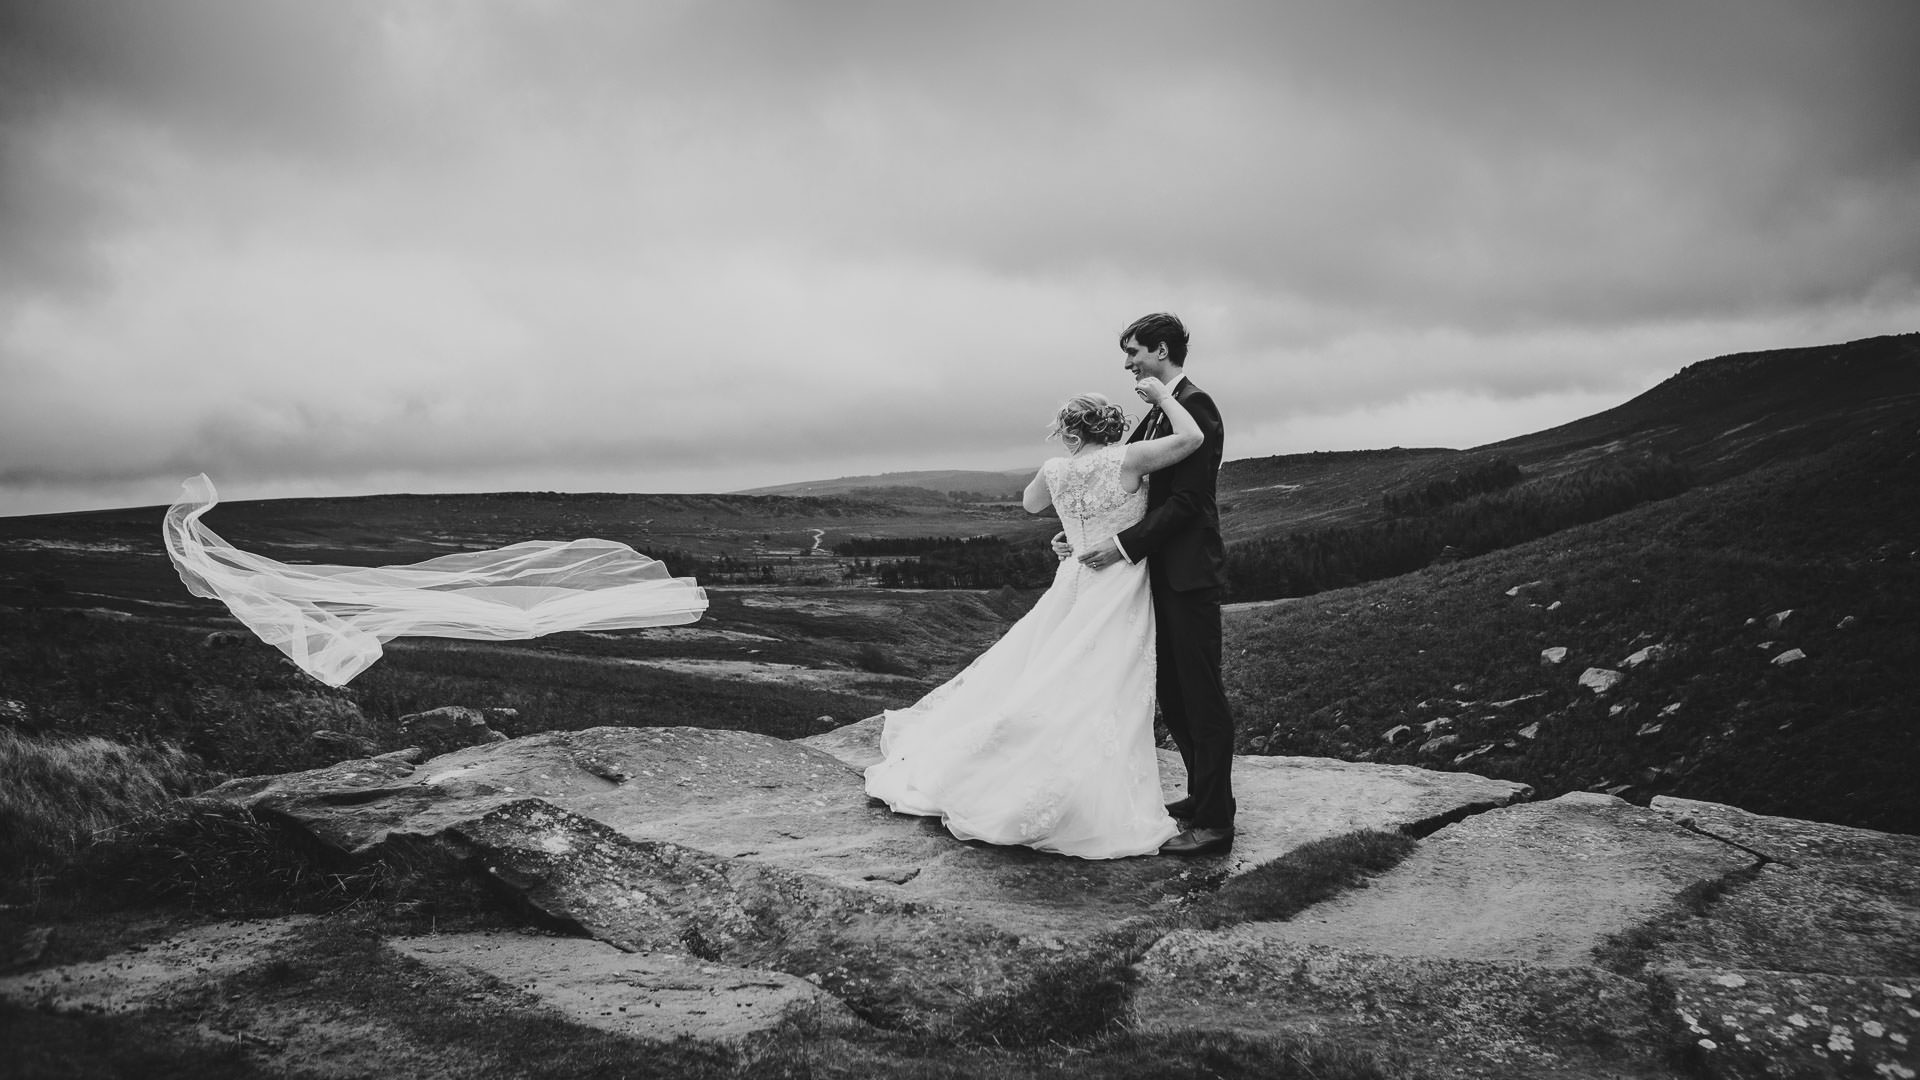 Wedding photographer based in Peak District, Tierney Photography.